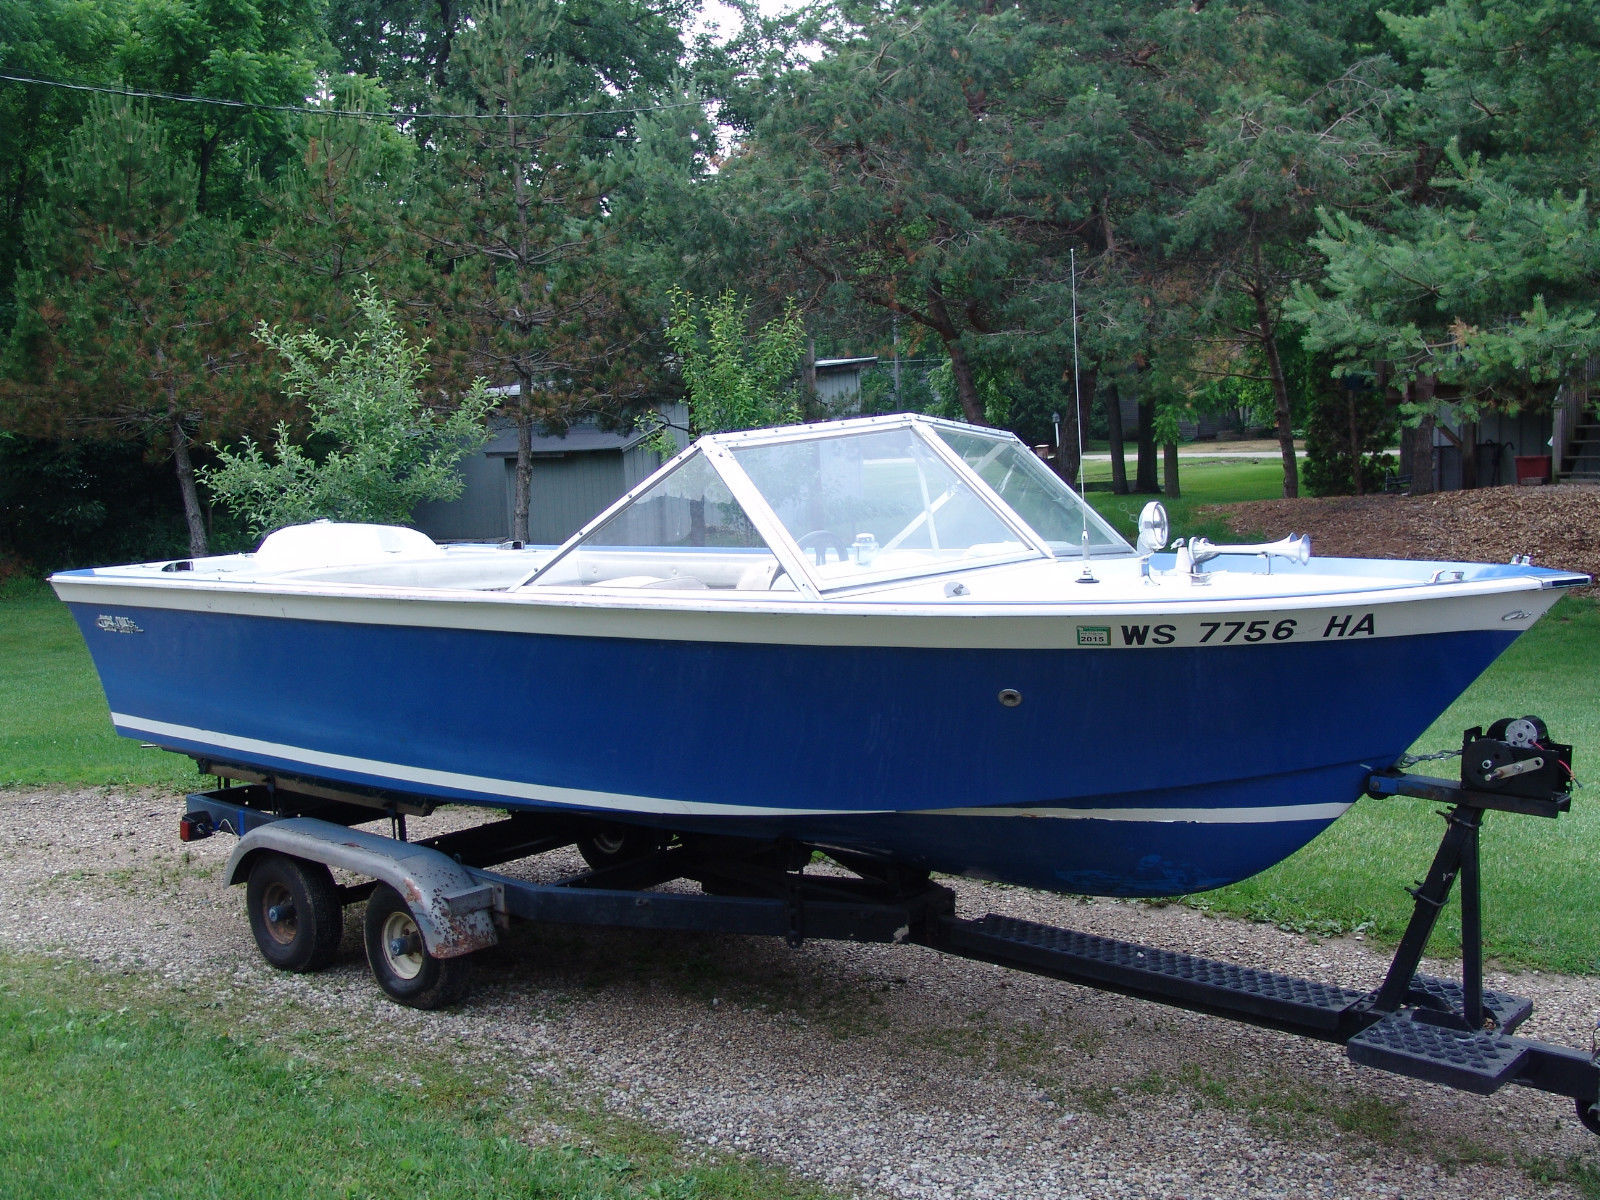 Chris Craft Corsair 1966 for sale for $2,500 - Boats-from ...